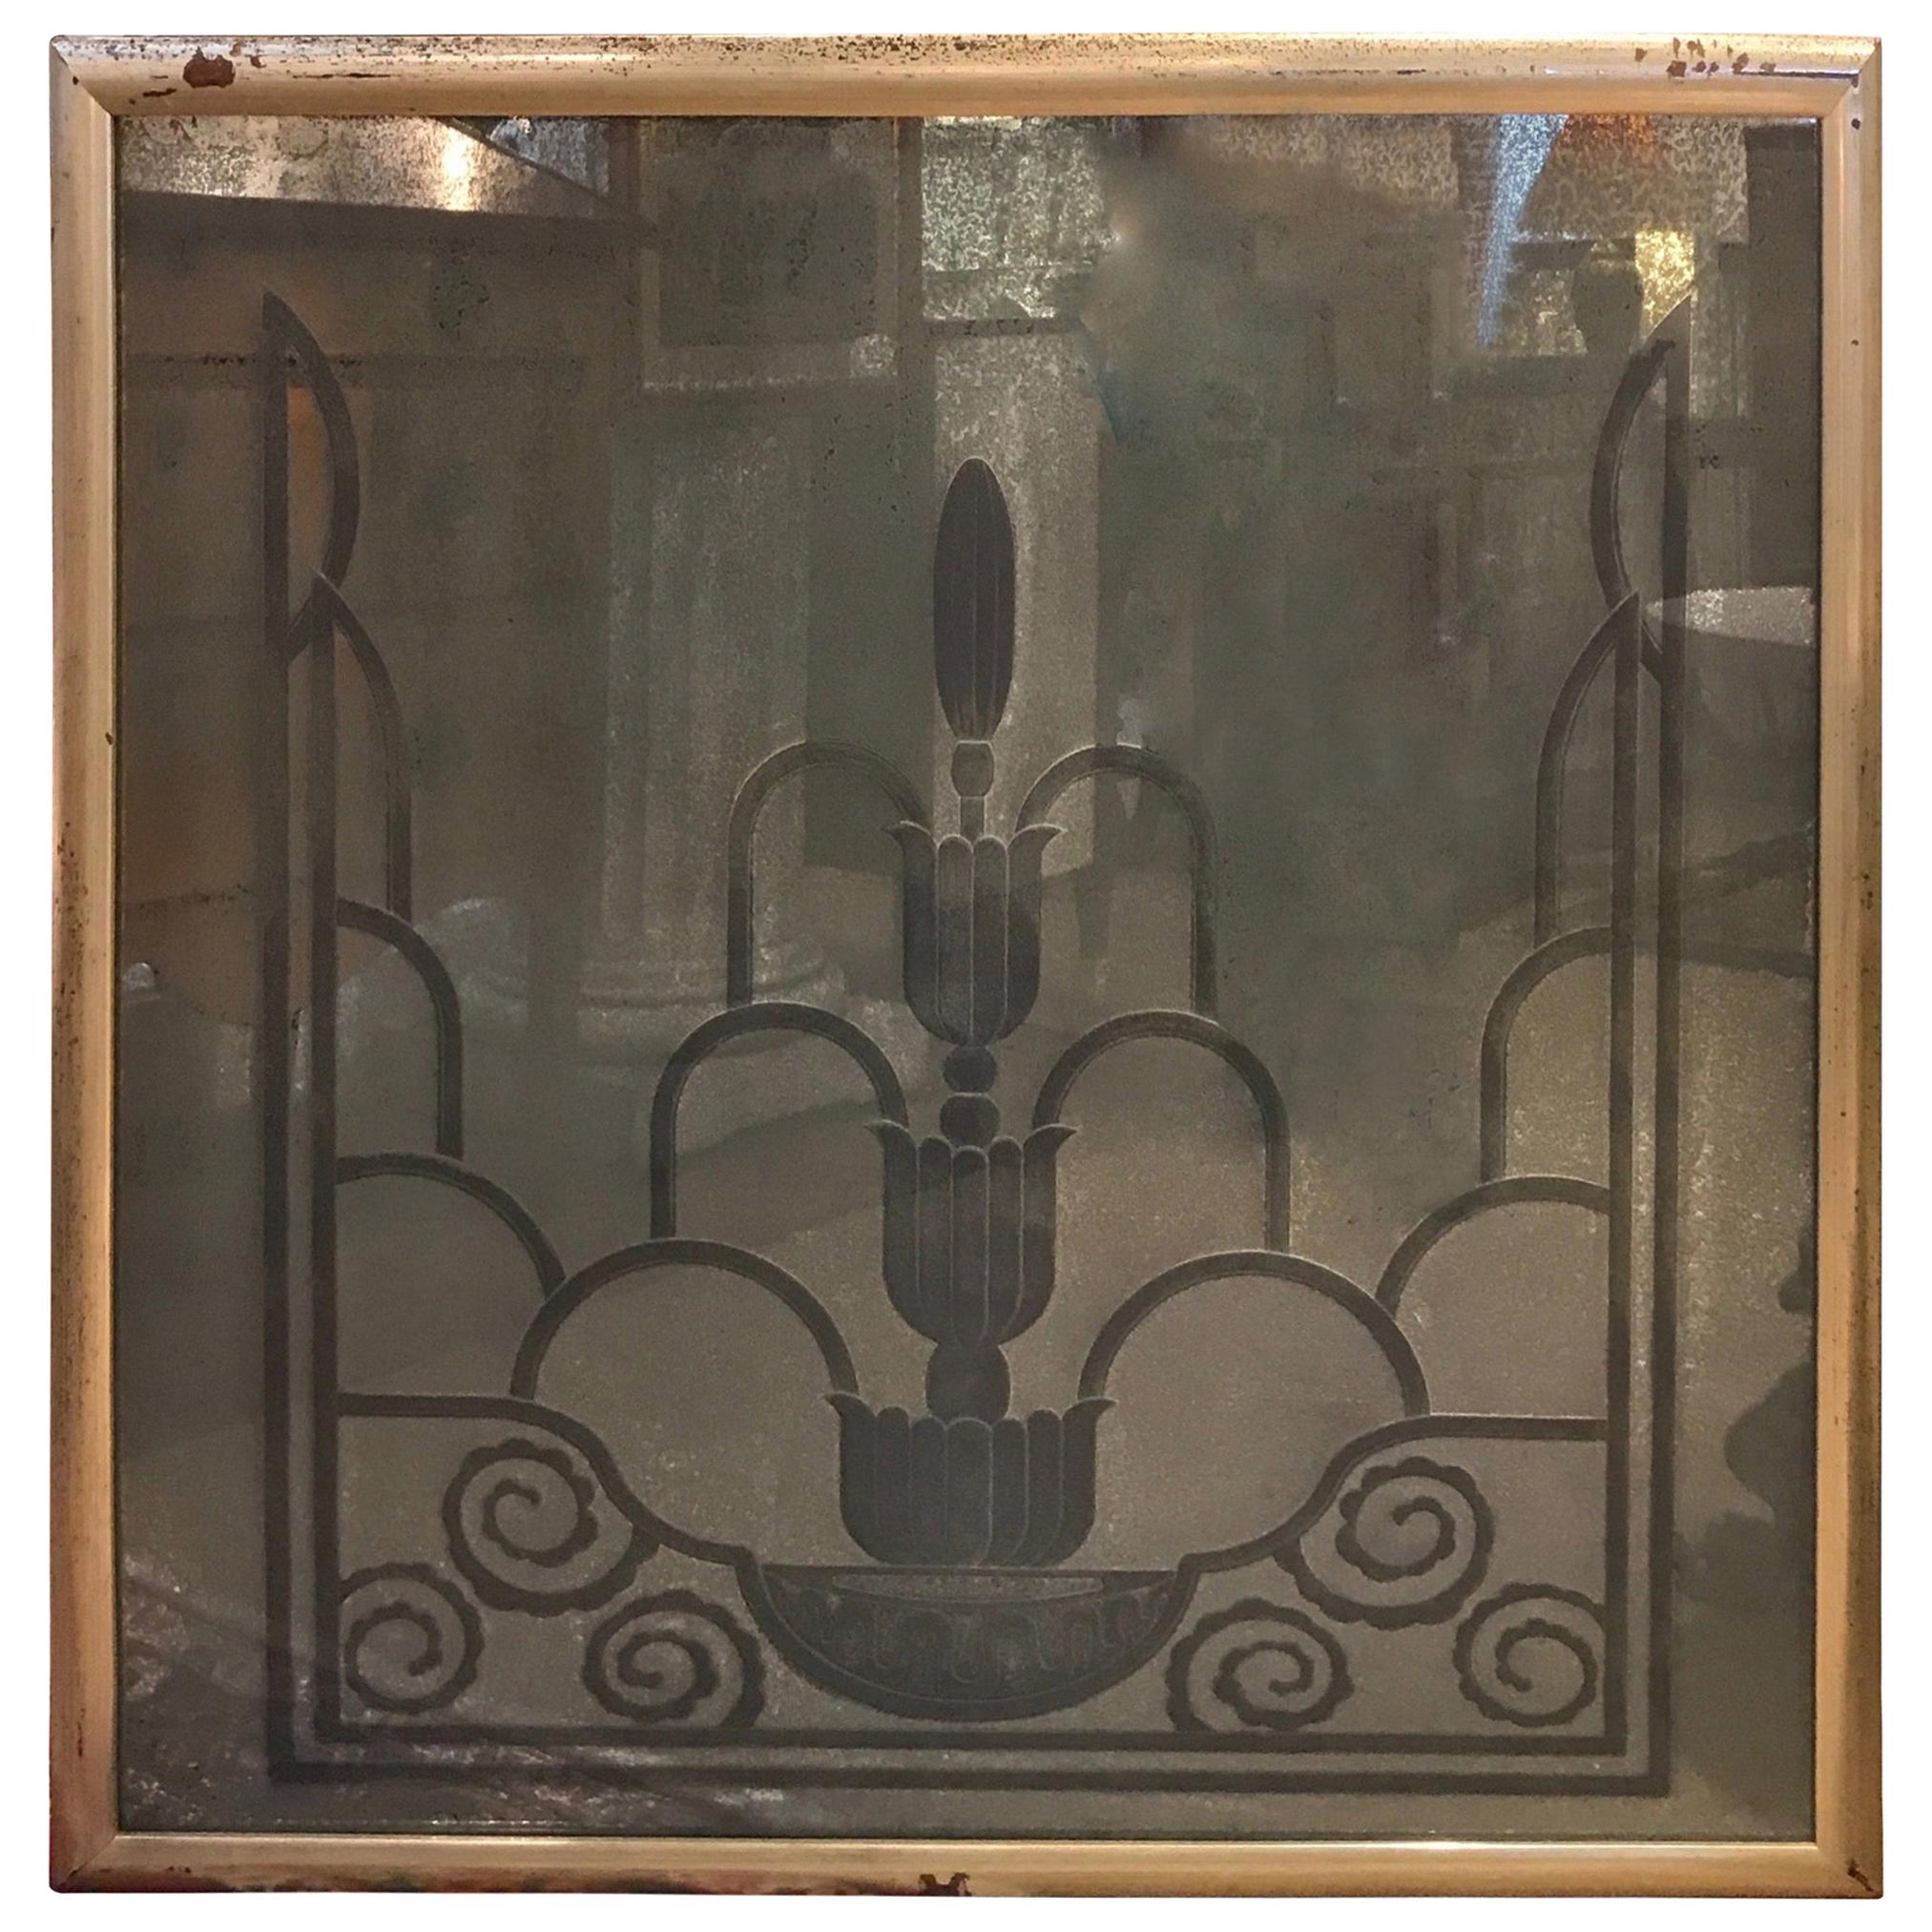 Engraved Art Deco Mirror, 1920s from the Waldorf Astoria